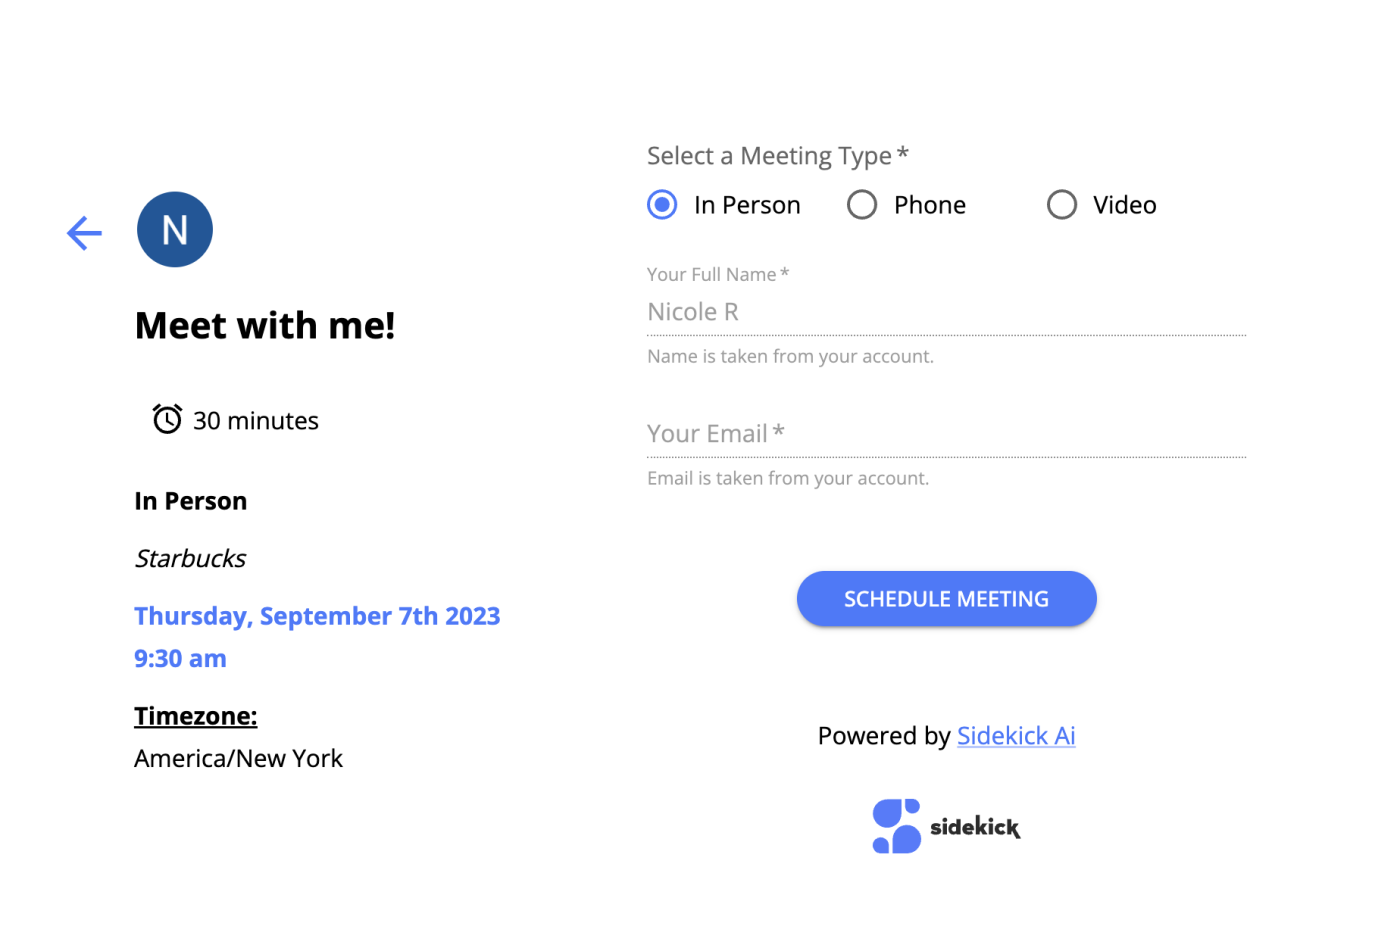 Sidekick, our pick for the best meeting scheduler for a variety of meeting types